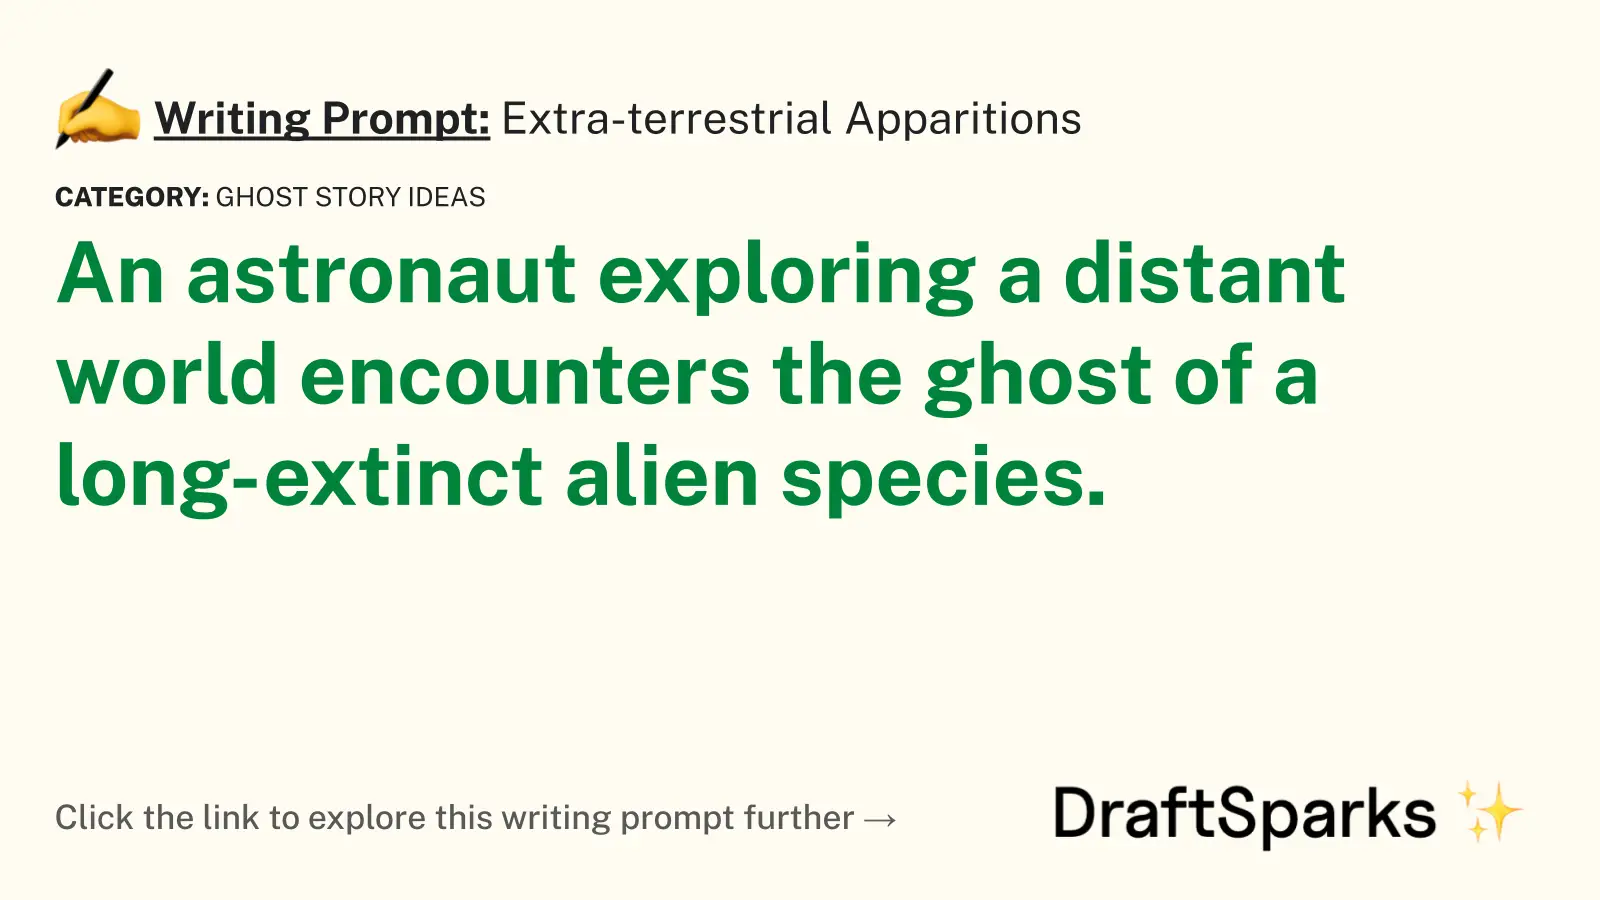 Extra-terrestrial Apparitions